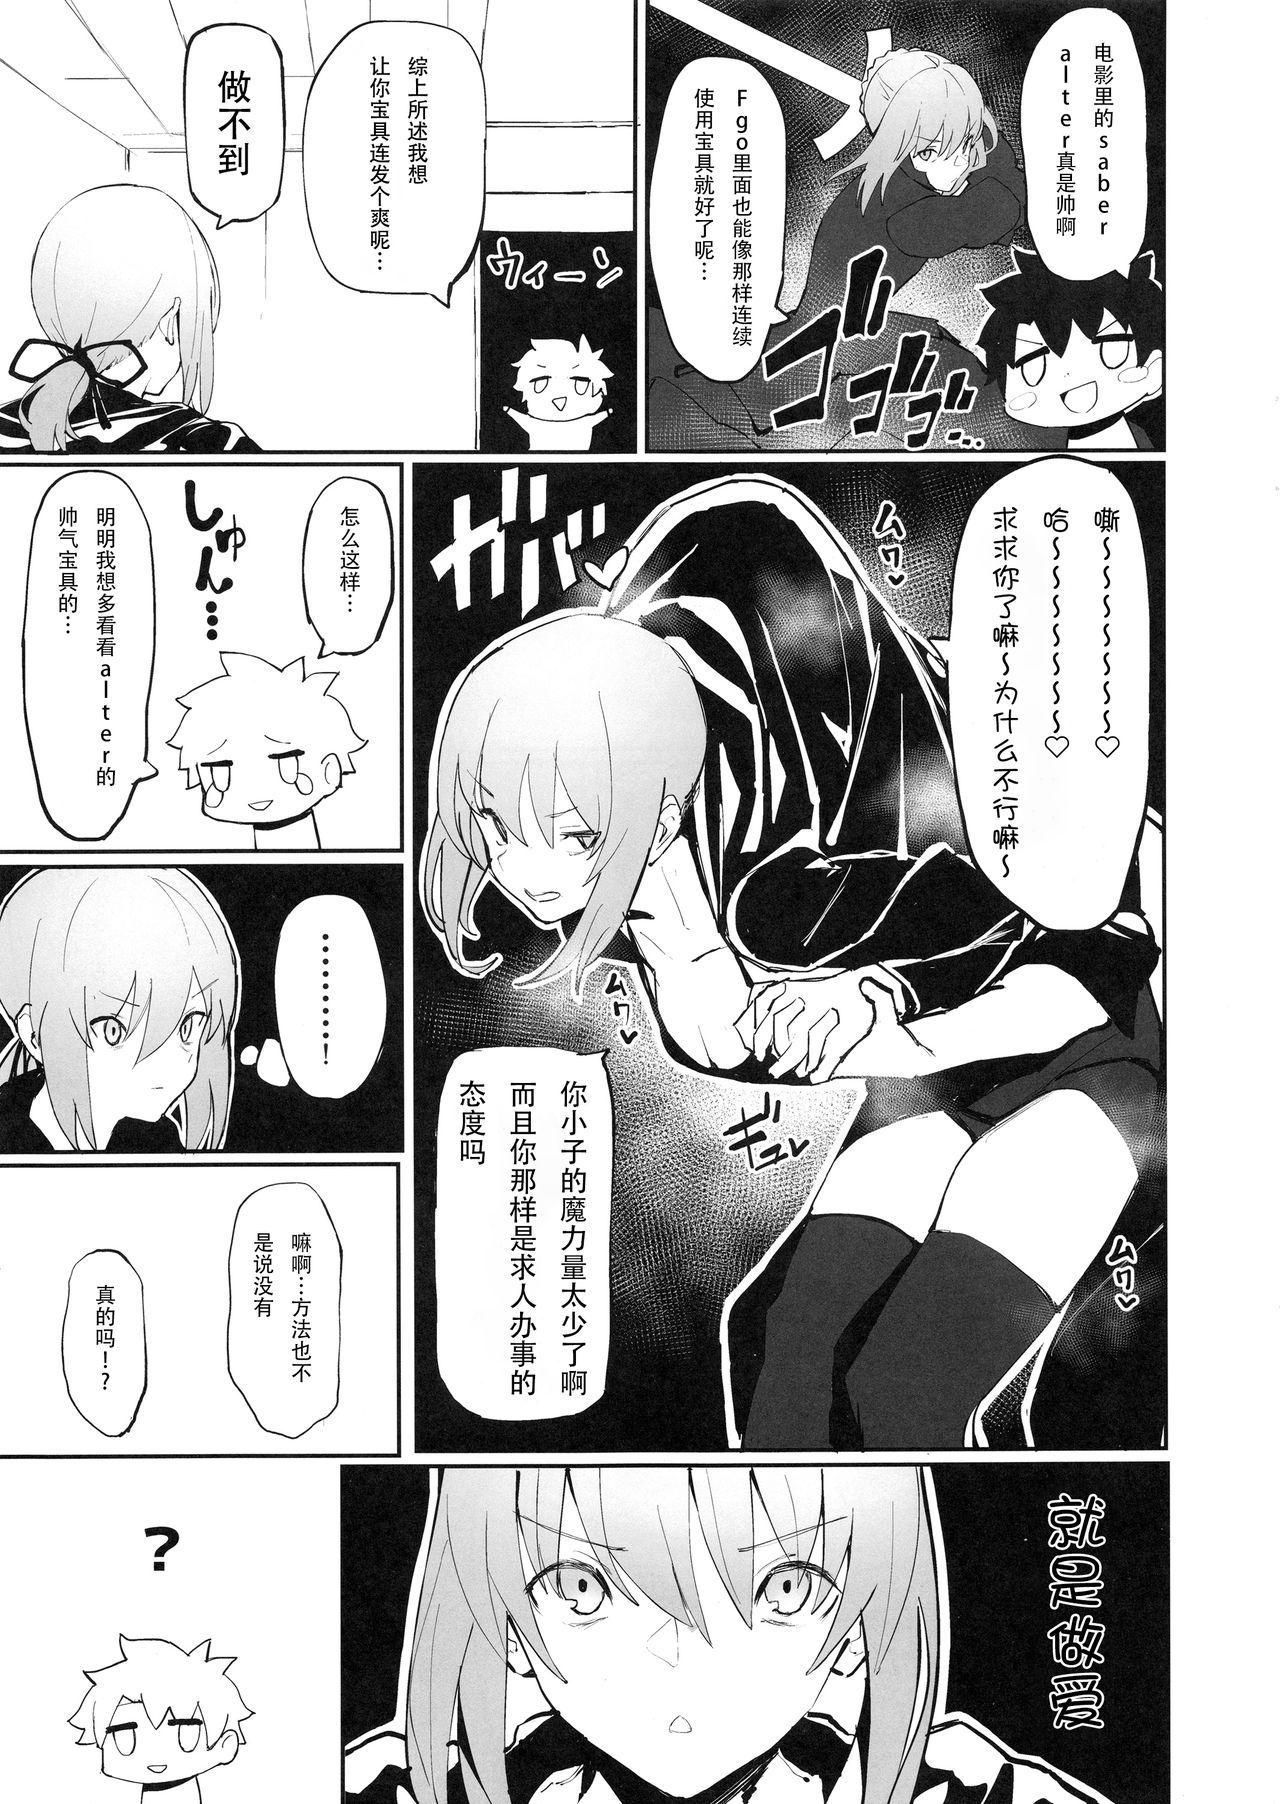 Rimjob Saber Alter to Maryoku Kyoukyuu | 和saber alter的魔力供给♡ - Fate grand order Denmark - Page 2